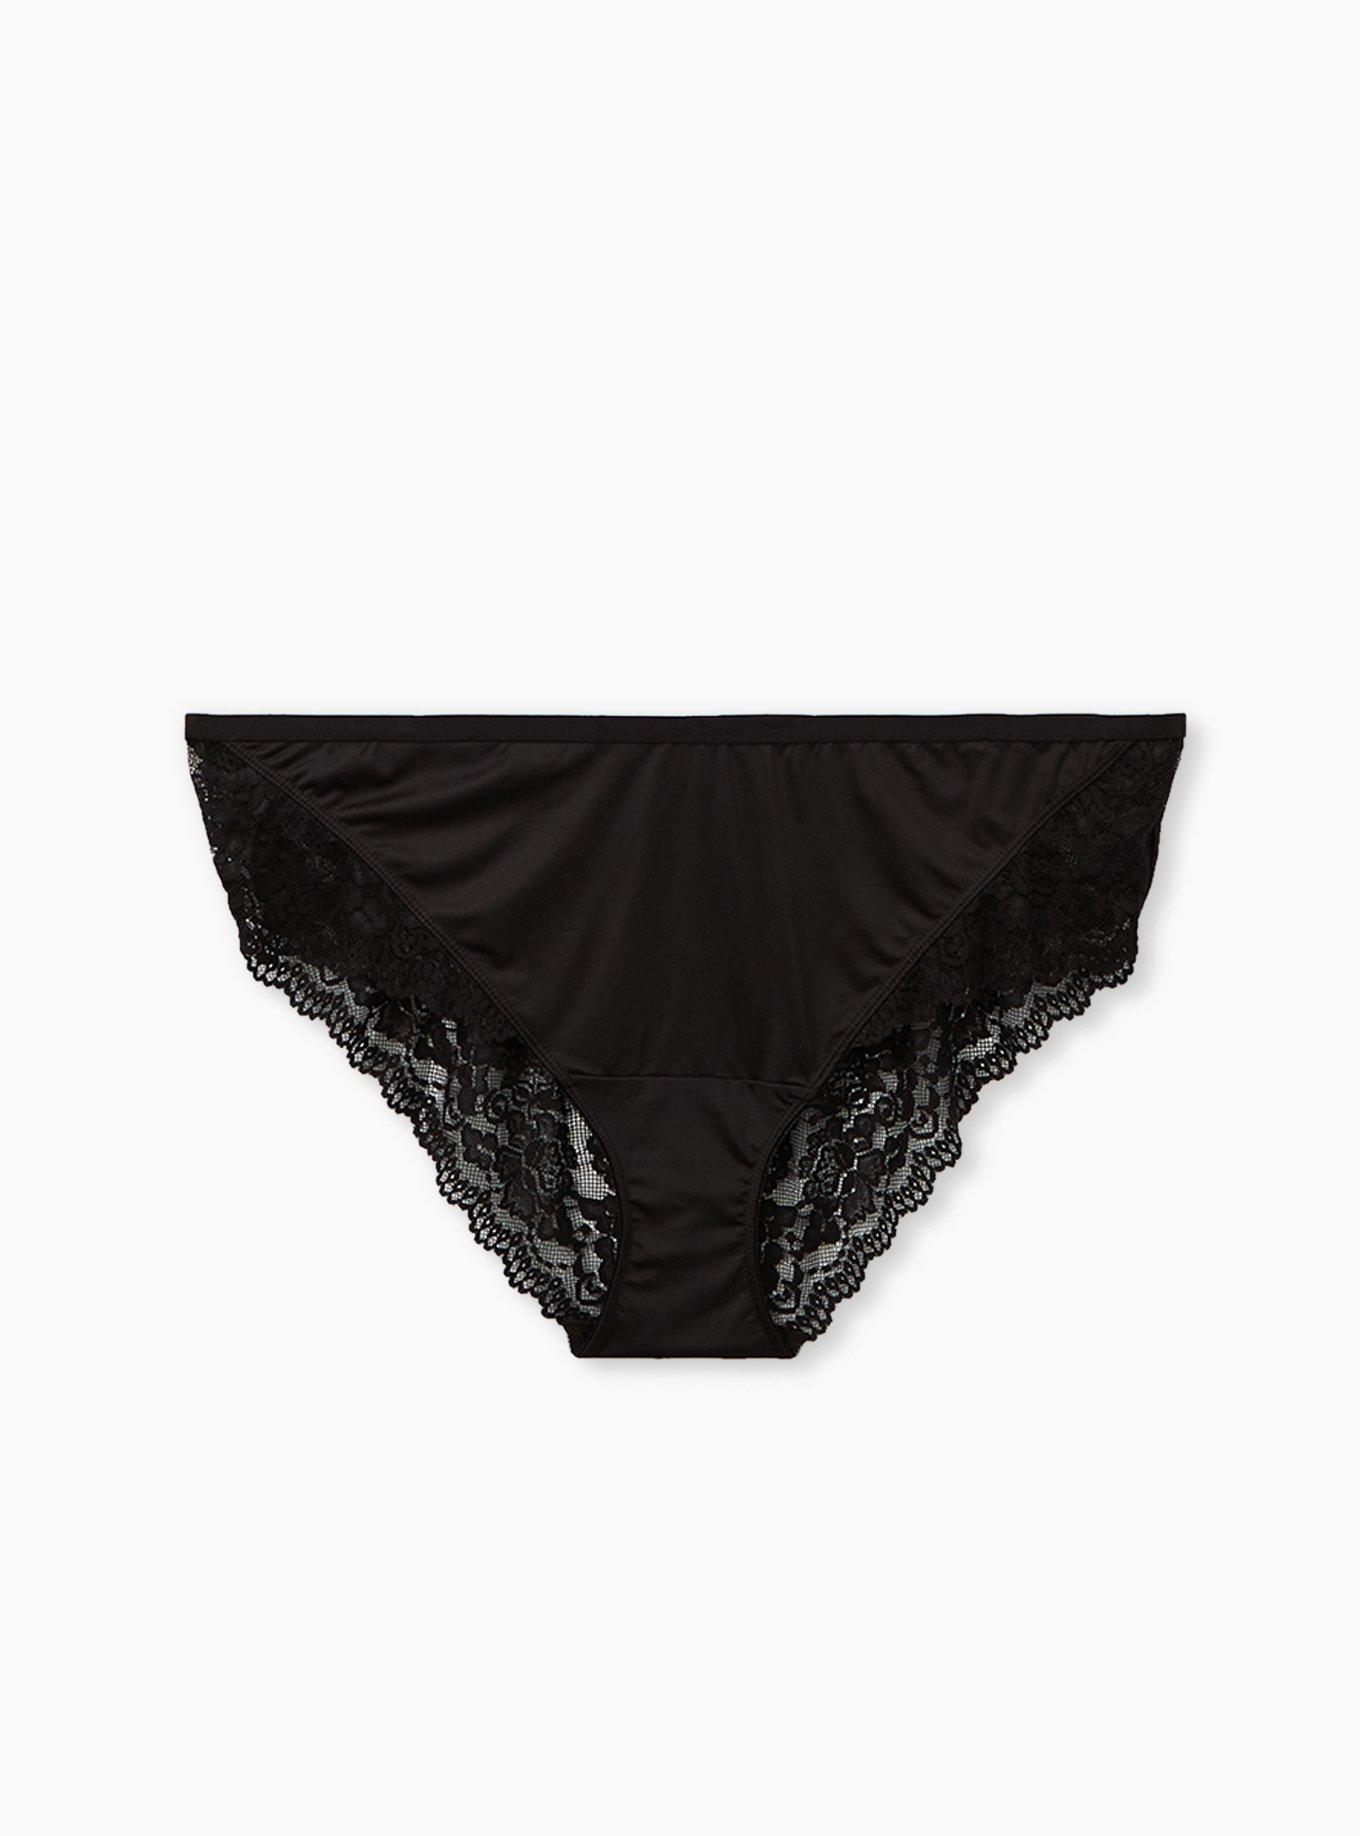 Plus Size - Lace Hipster Panty With Strappy Cage Back - Torrid